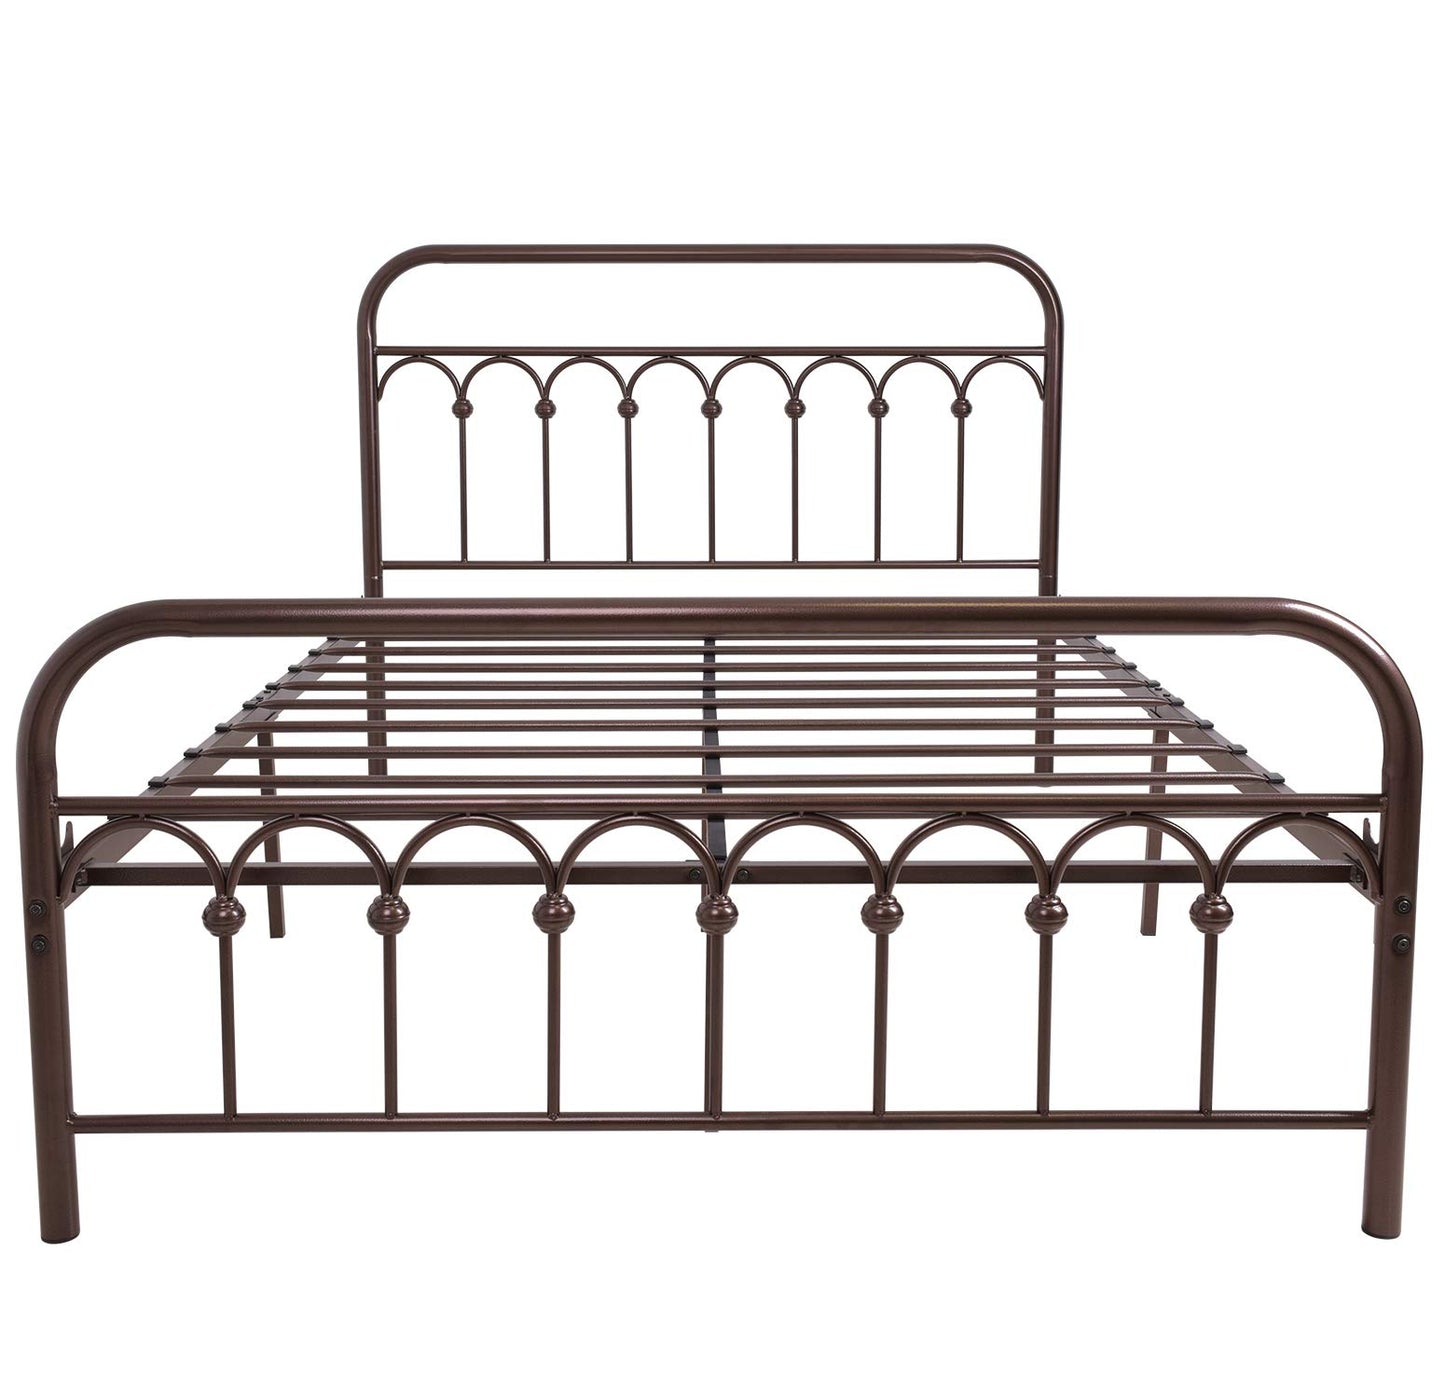 YALAXON Vintage Sturdy Full Size Metal Bed Frame with Headboard and Footboard Basic Bed Frame No Box Spring Needed，Antique Brown